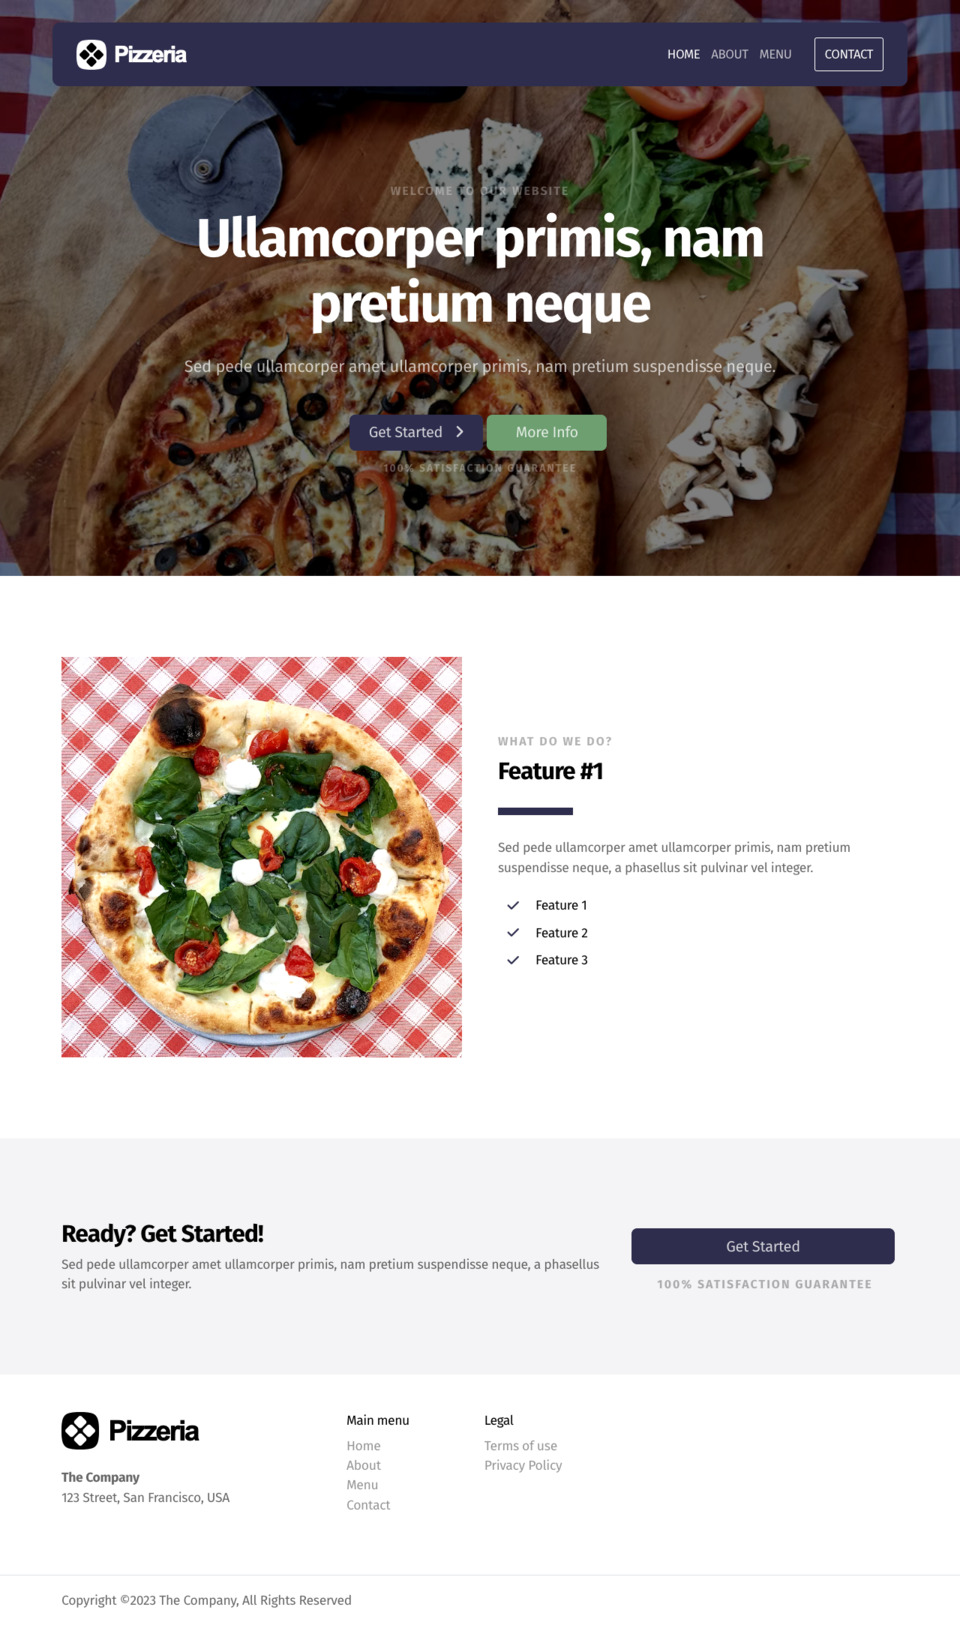 Pizzeria Website Template - Ideal for pizza restaurants, Italian eateries, diners, and small food businesses.